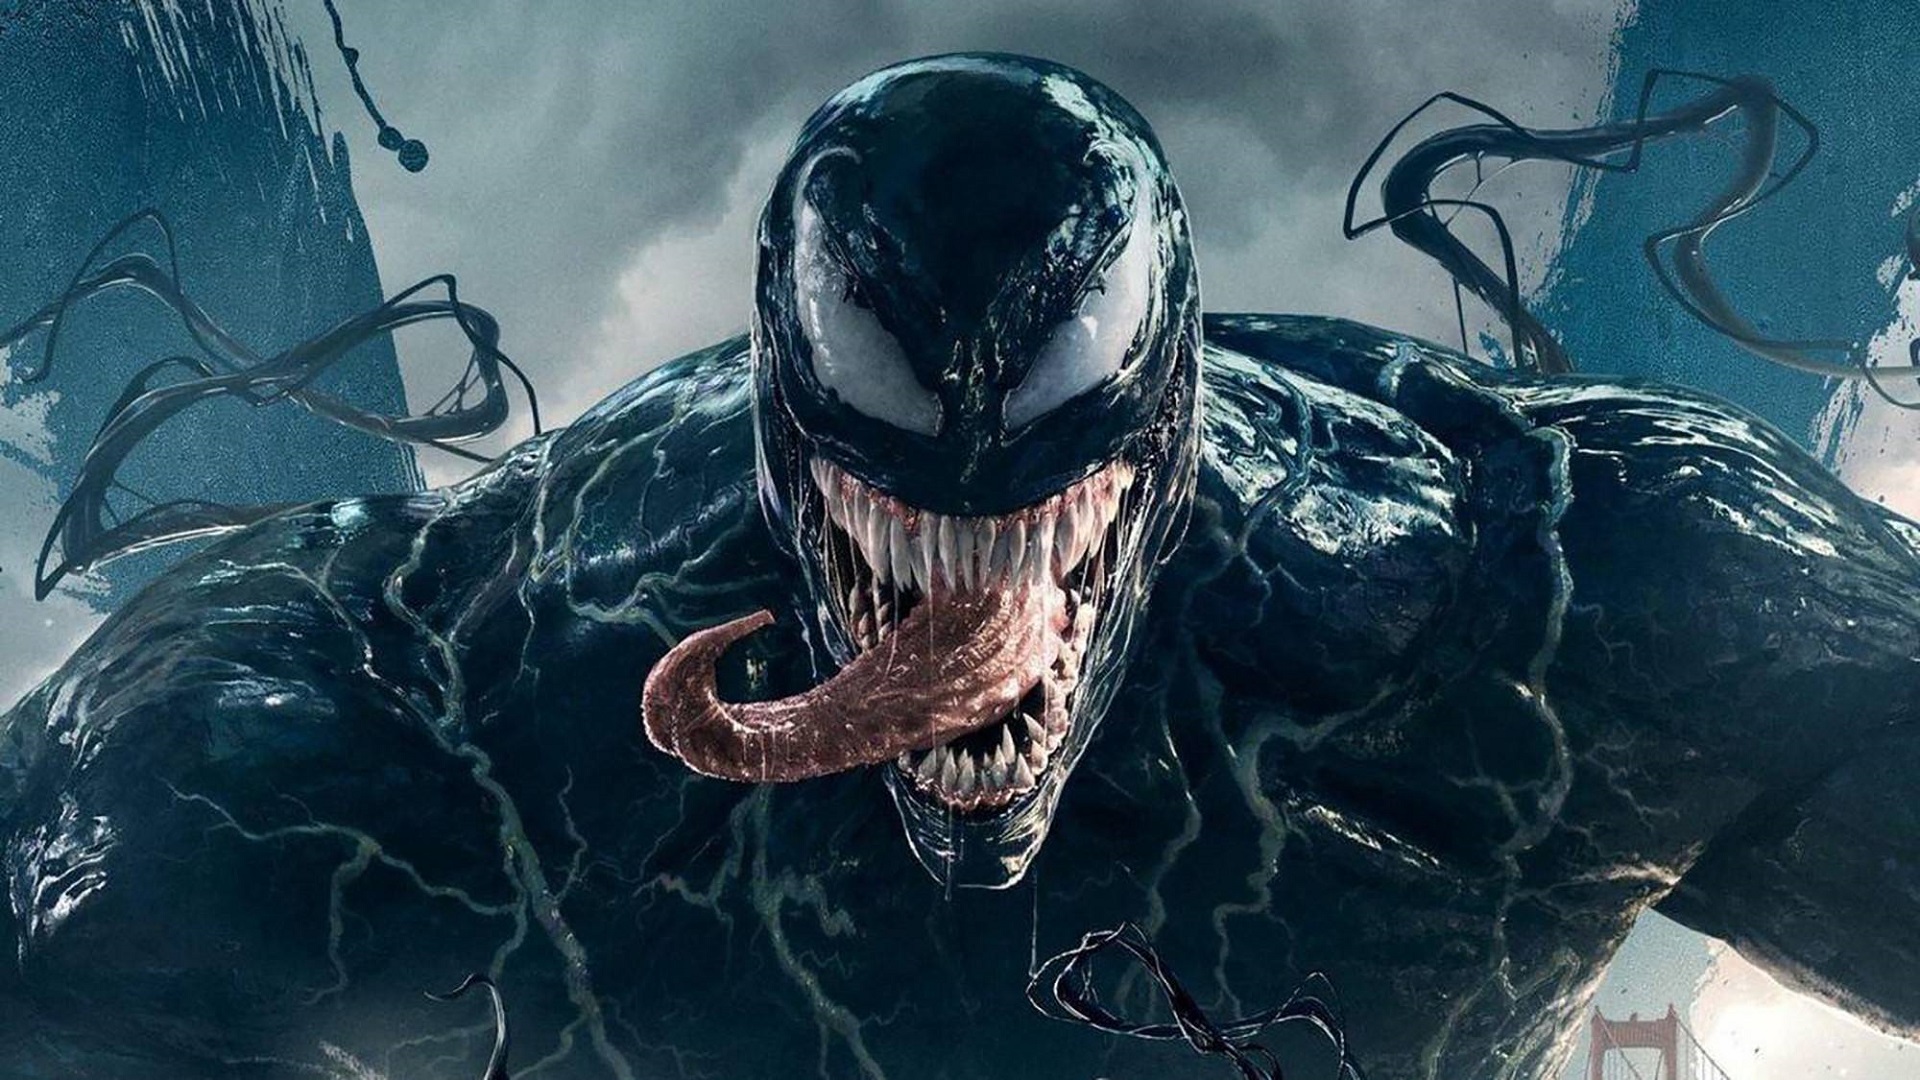 A symbiosis of film and science: a new species of venomous spider has been discovered in Australia and named after Marvel anti-hero Tom Hardy